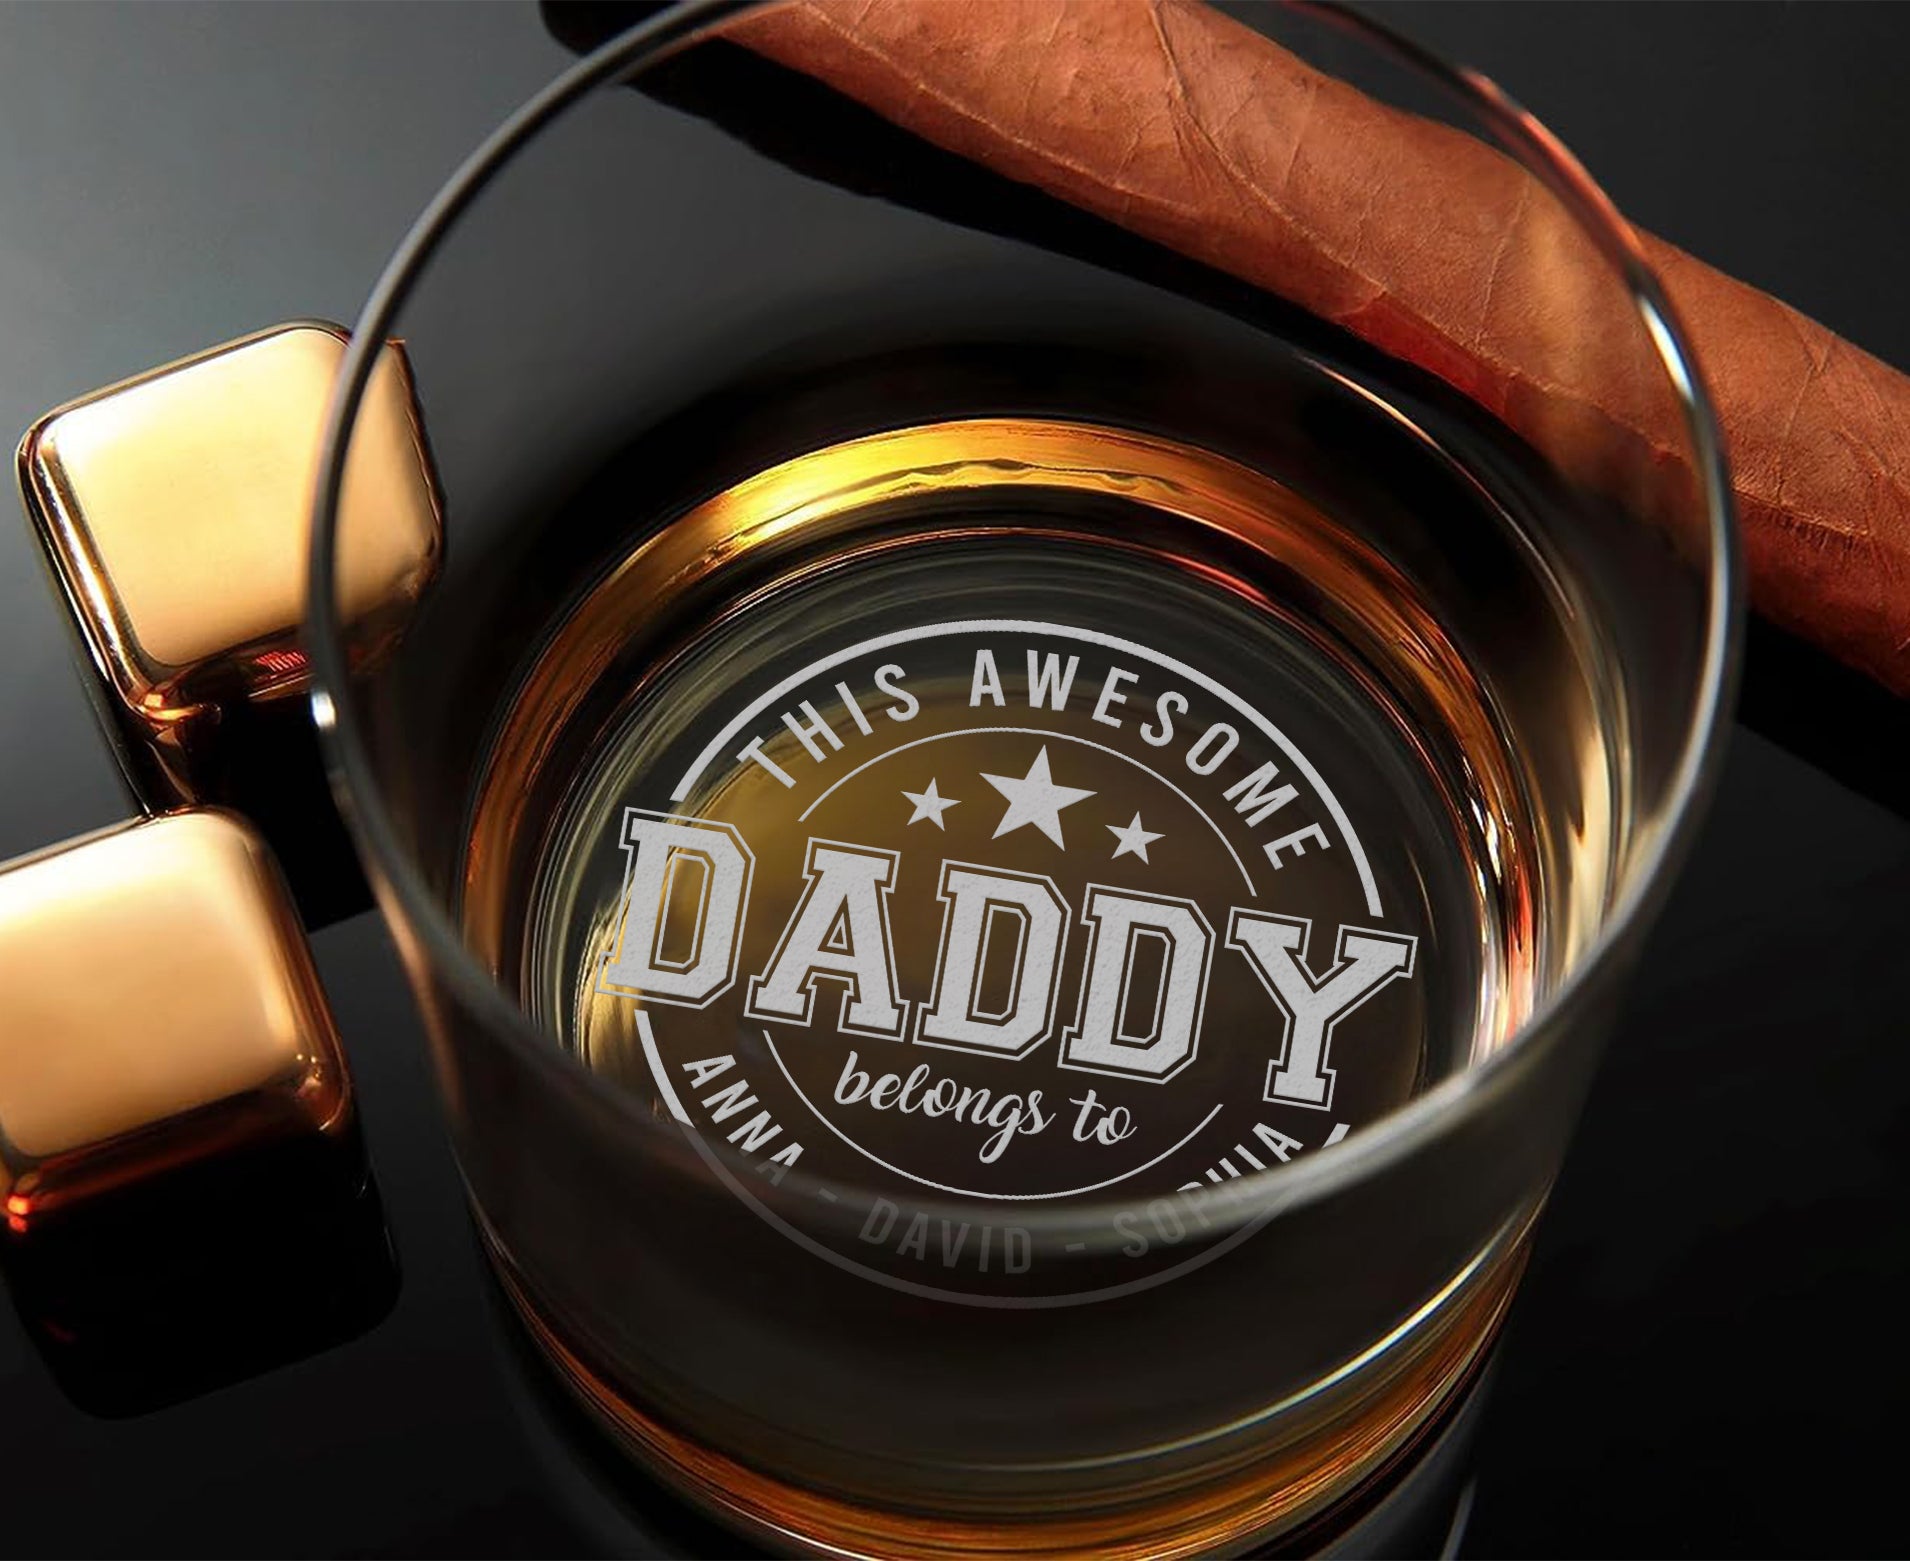 This awesome daddy belongs to engraved whiskey glass, personalized gifts, fathers day gifts, gifts for dad, dad gifts, gifts for him